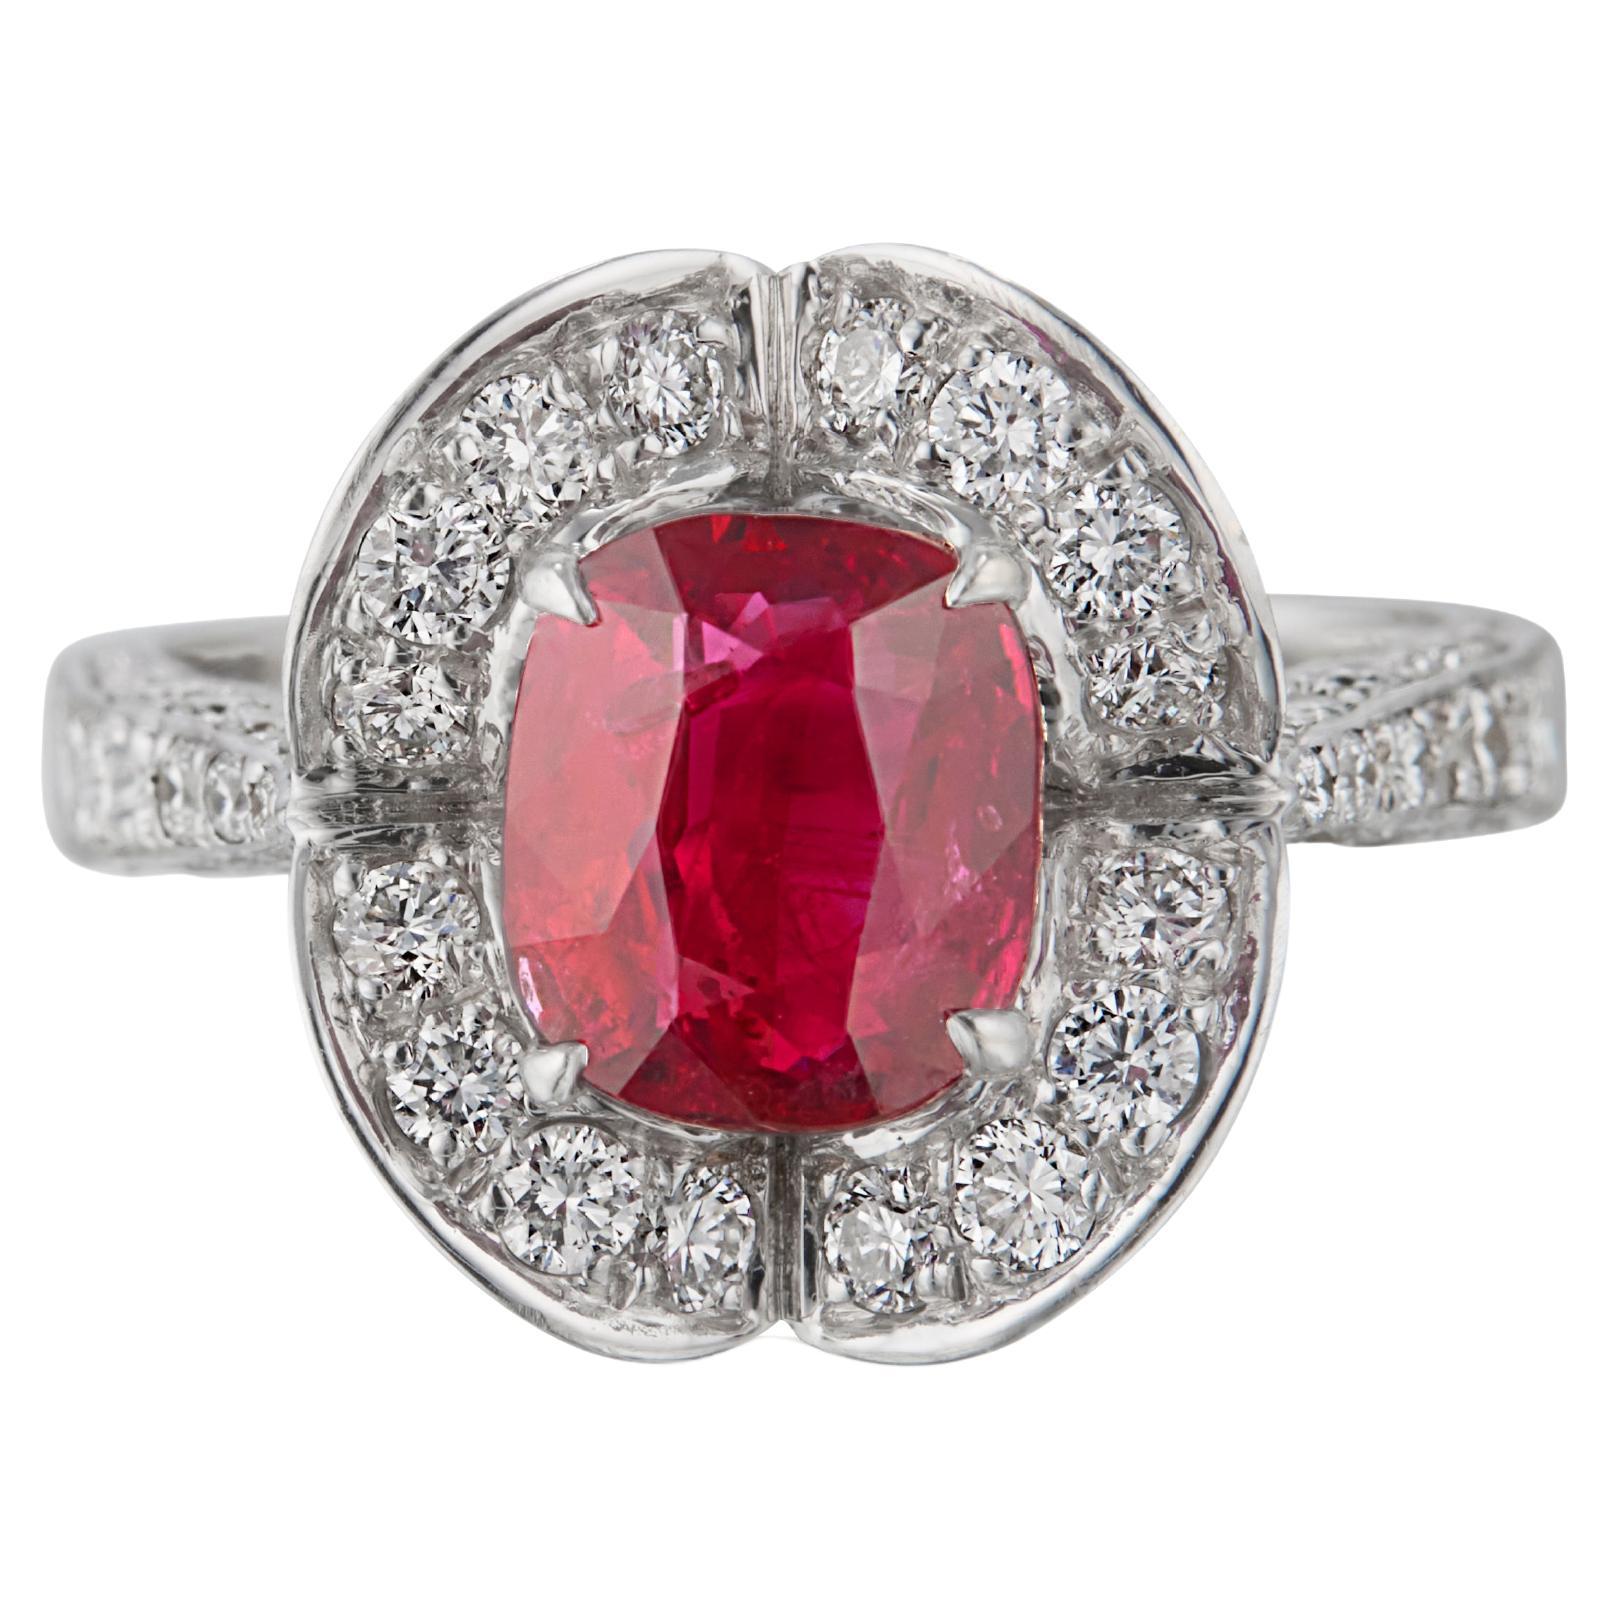 18K WHITE GOLD 
102 DIAMONDS  1.237 CARATS
1 NO-HEAT BURMESE RUBY  1.97 CARATS
GUBELIN LAB CERTIFIED, RED

Indulge in the allure of this remarkable creation, Eternal Rose, designed to capture everlasting love and beauty of a perennial rose.  

At